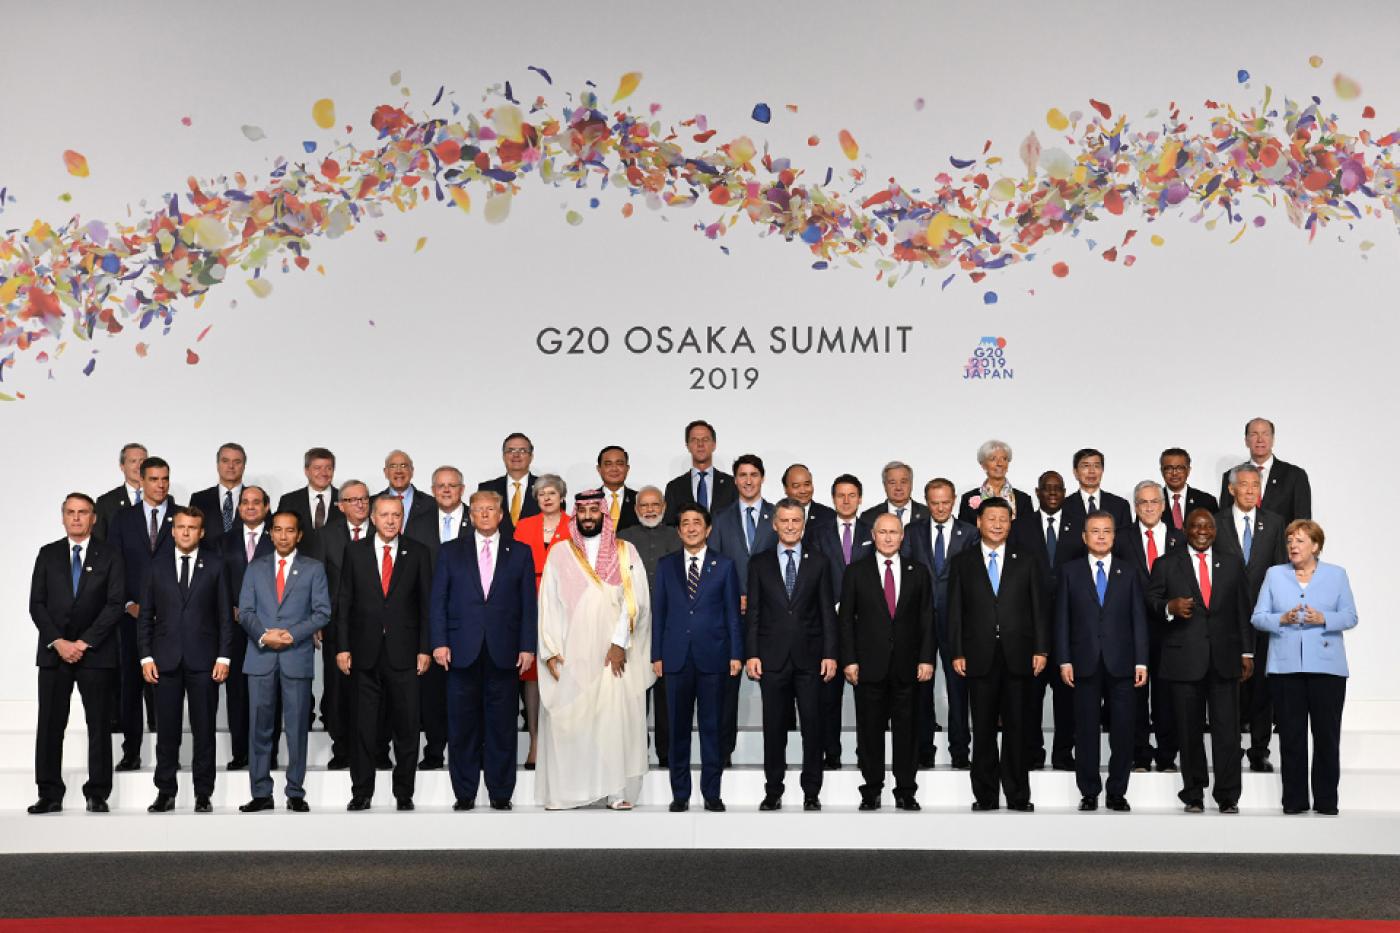 Saudi crown prince stands with Trump in G20 photo days after UN Khashoggi  report | Middle East Eye